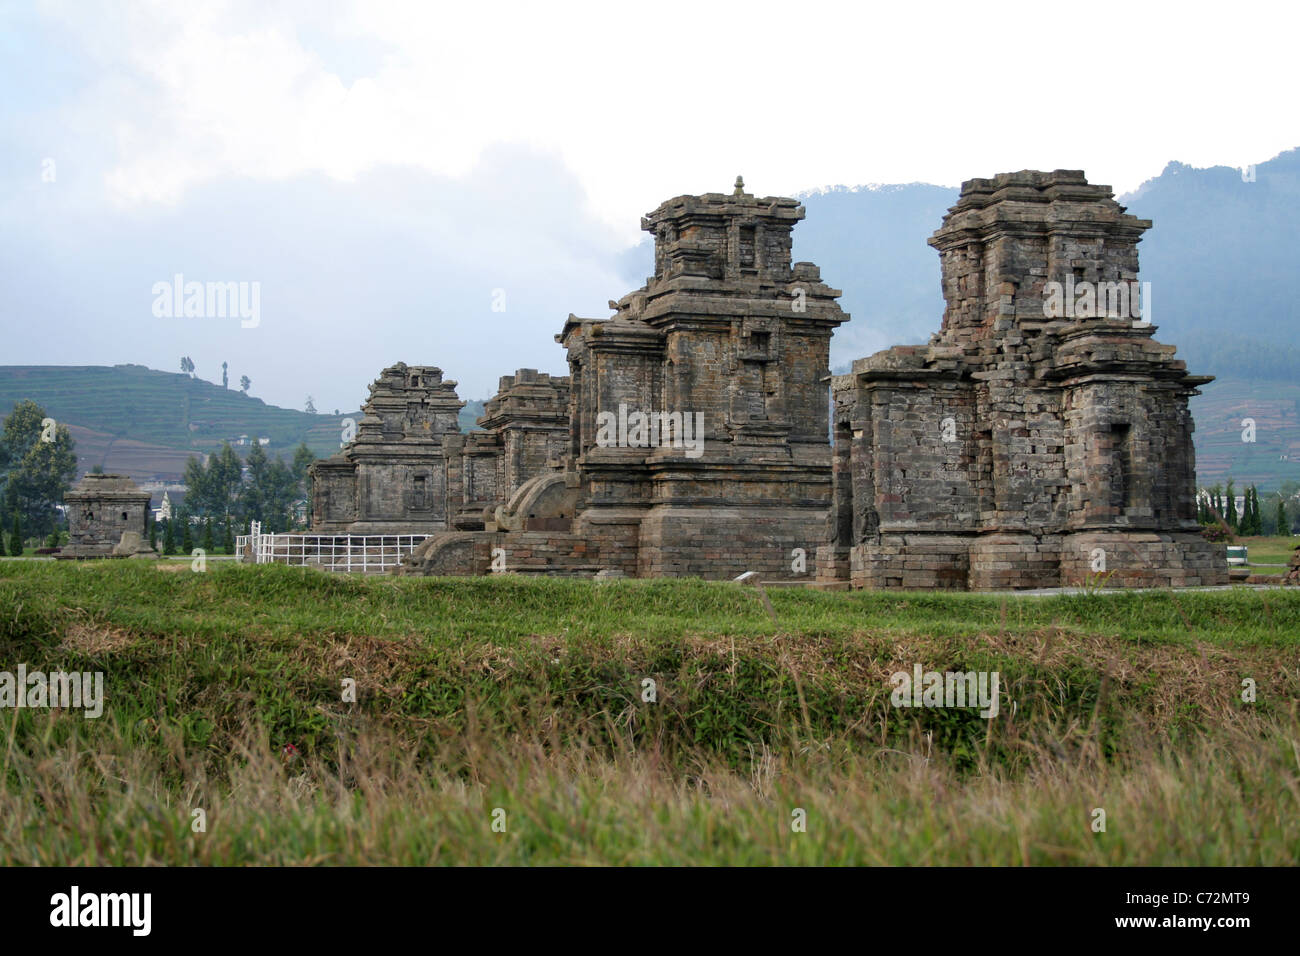 Candi Arjuna temple complex at Dieng Plateau , Java, Indonesia. Stock Photo